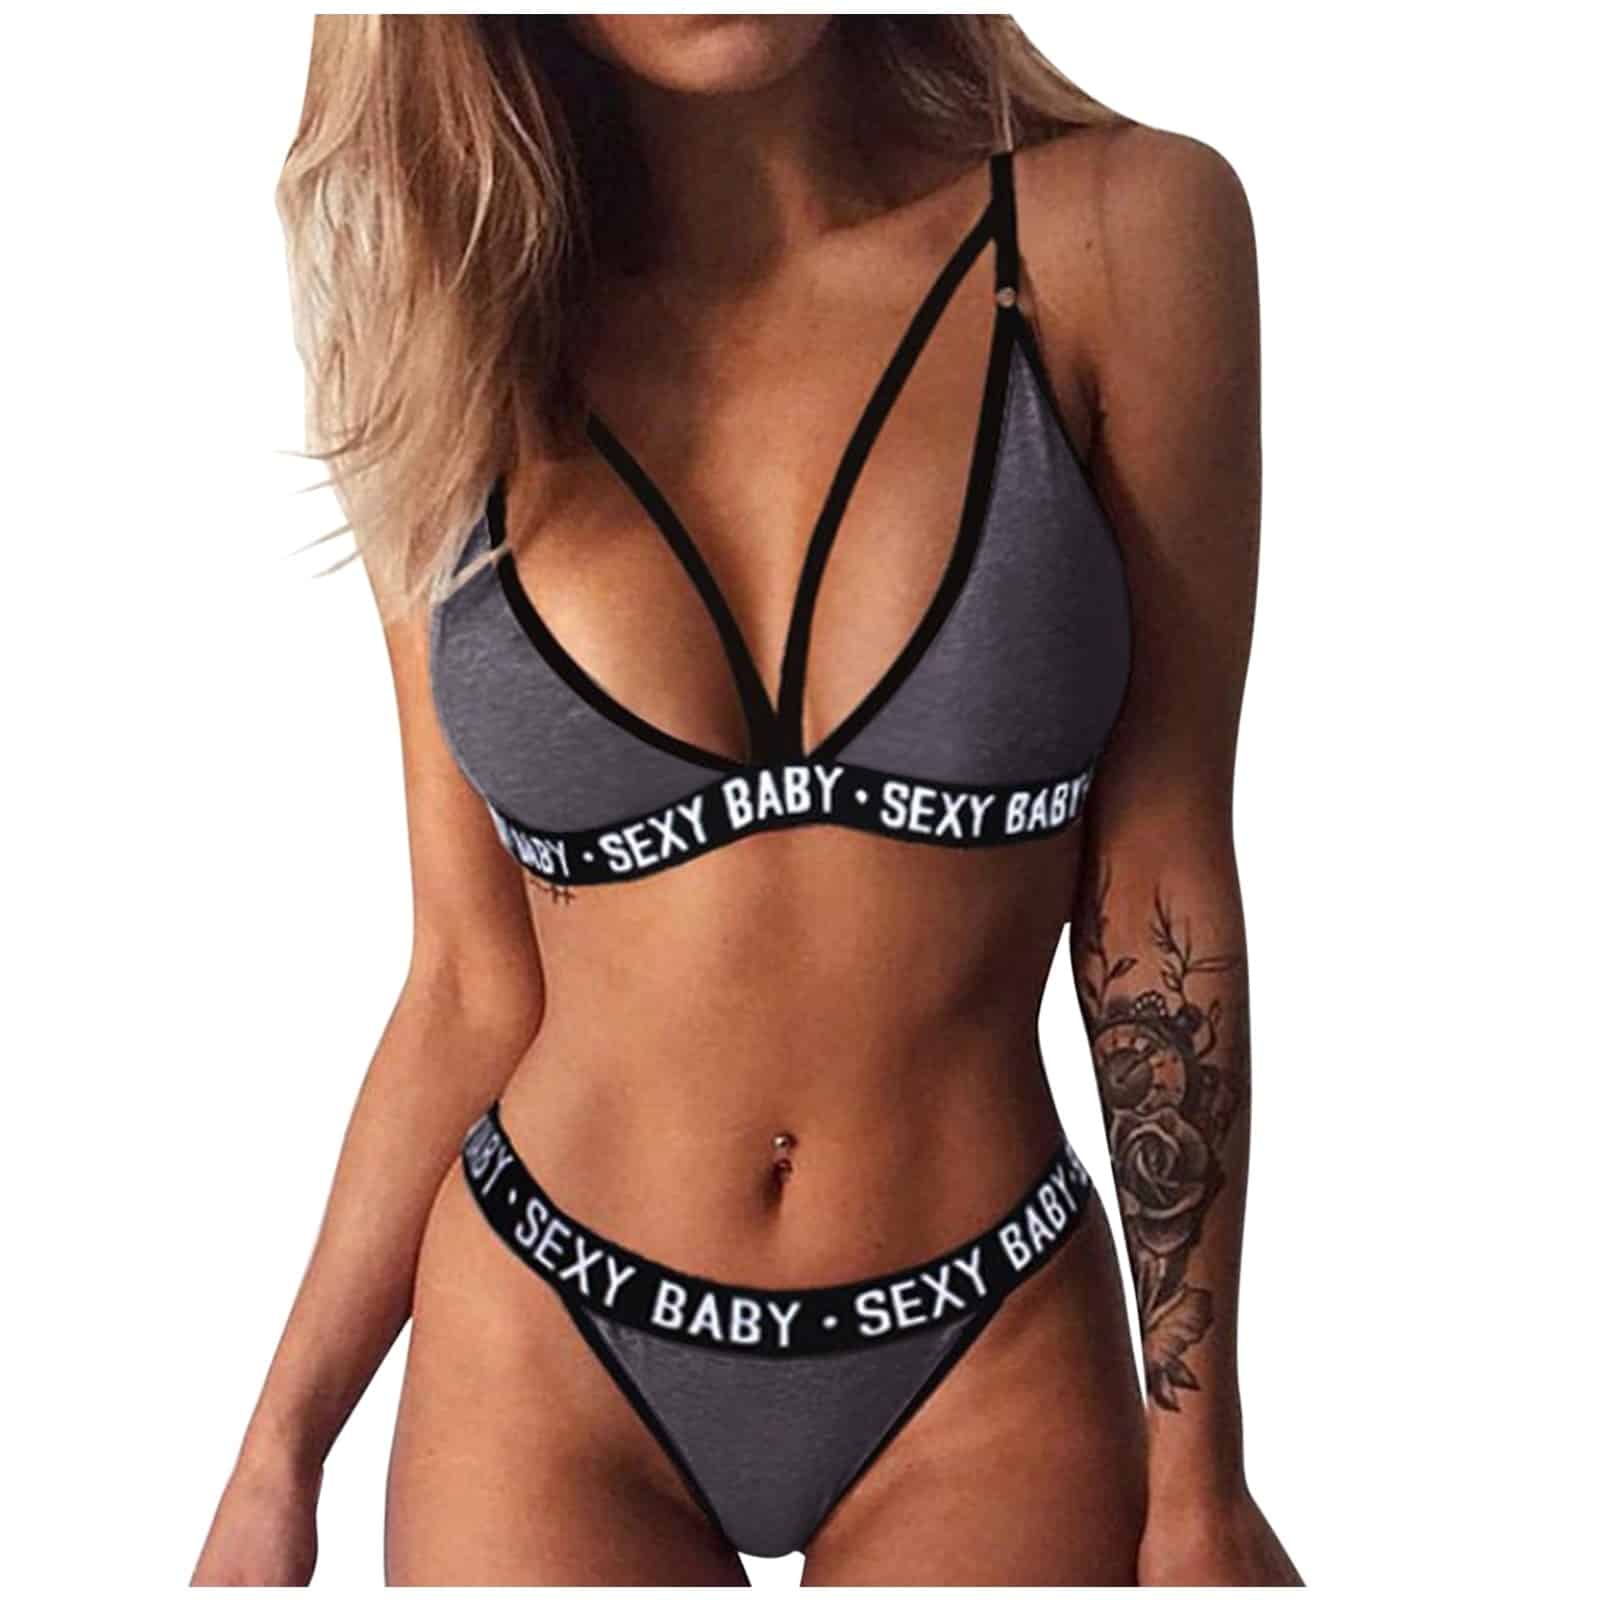 Women's Sexy Sports Underwear Set Girl Sexy Bandage Corset Letter Bra & Brief Suits Push Up Bra+Thongs Panties Lingerie